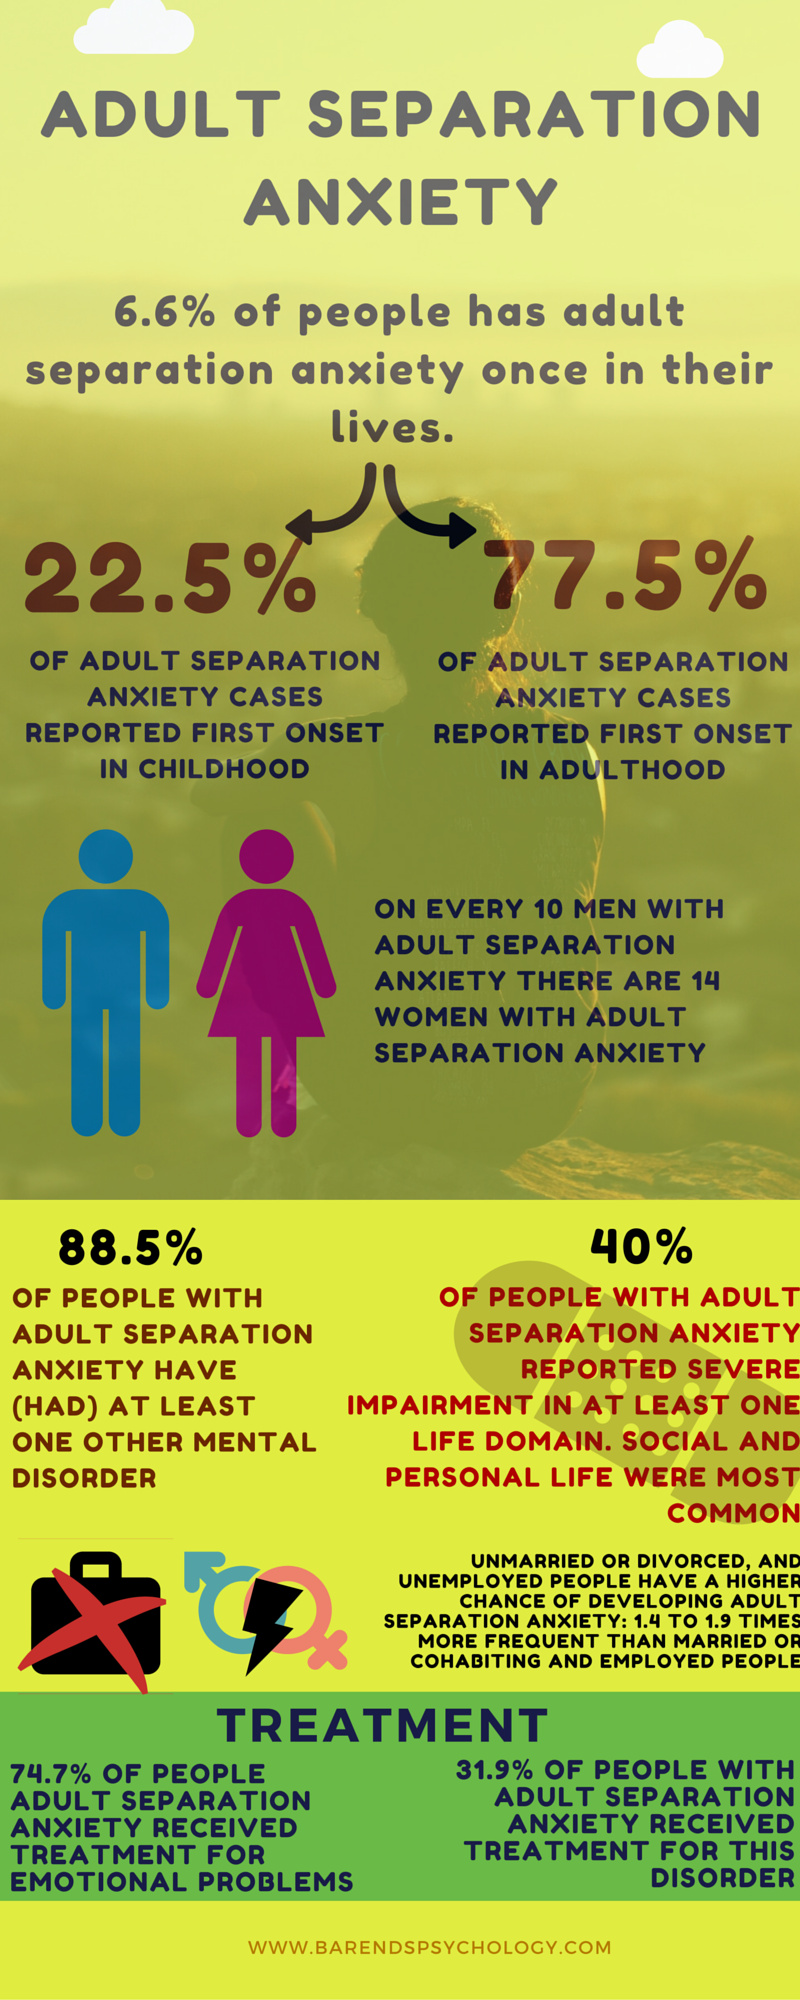 Adult separation anxiety how to separation anxiety?